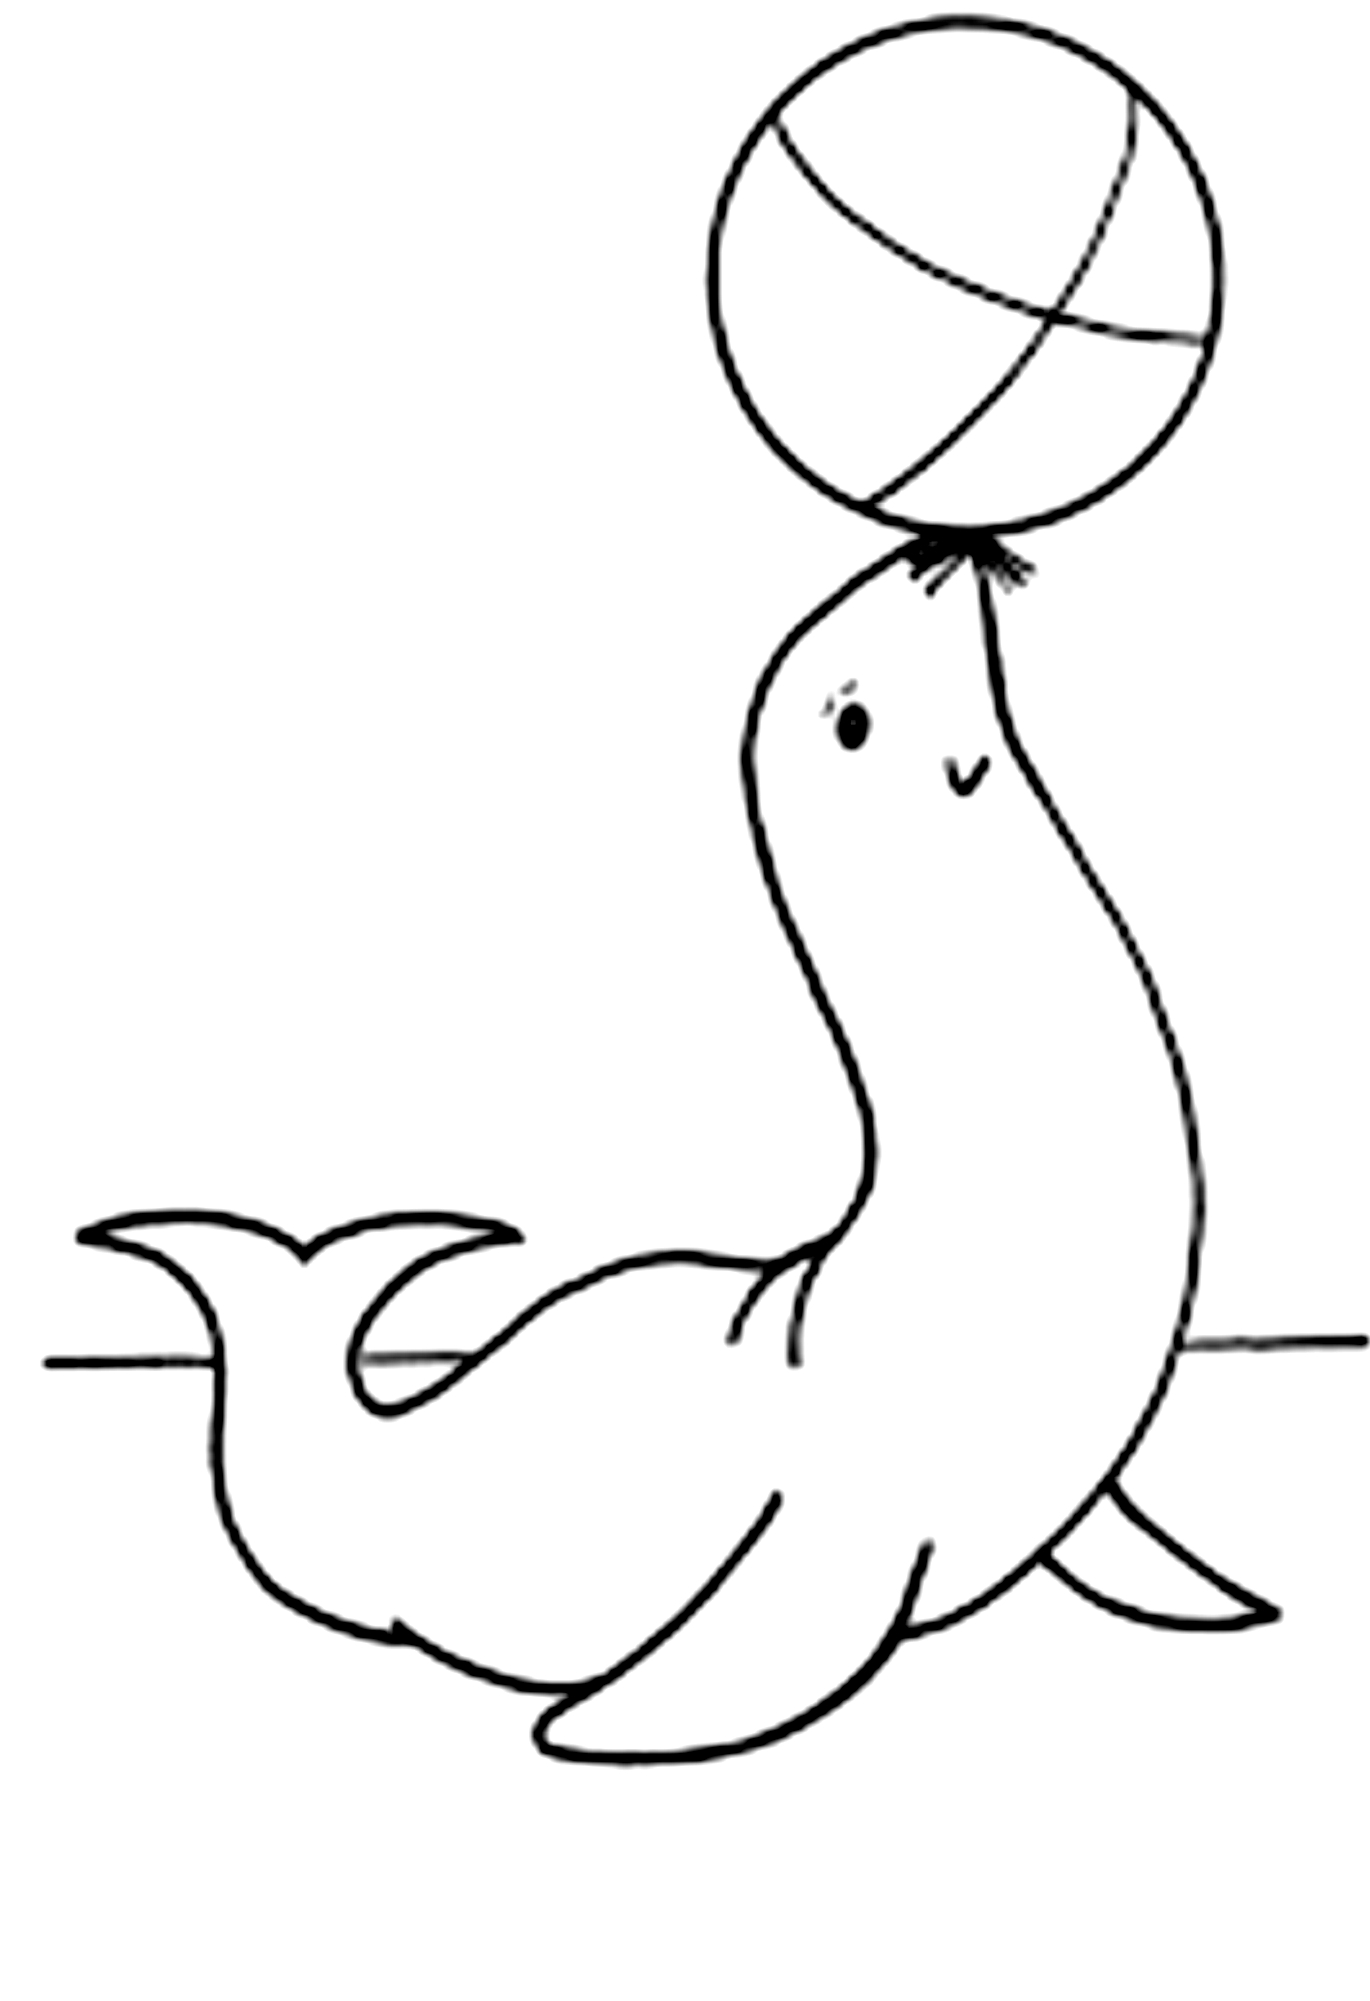 Drawing 22 from Seals coloring page to print and coloring